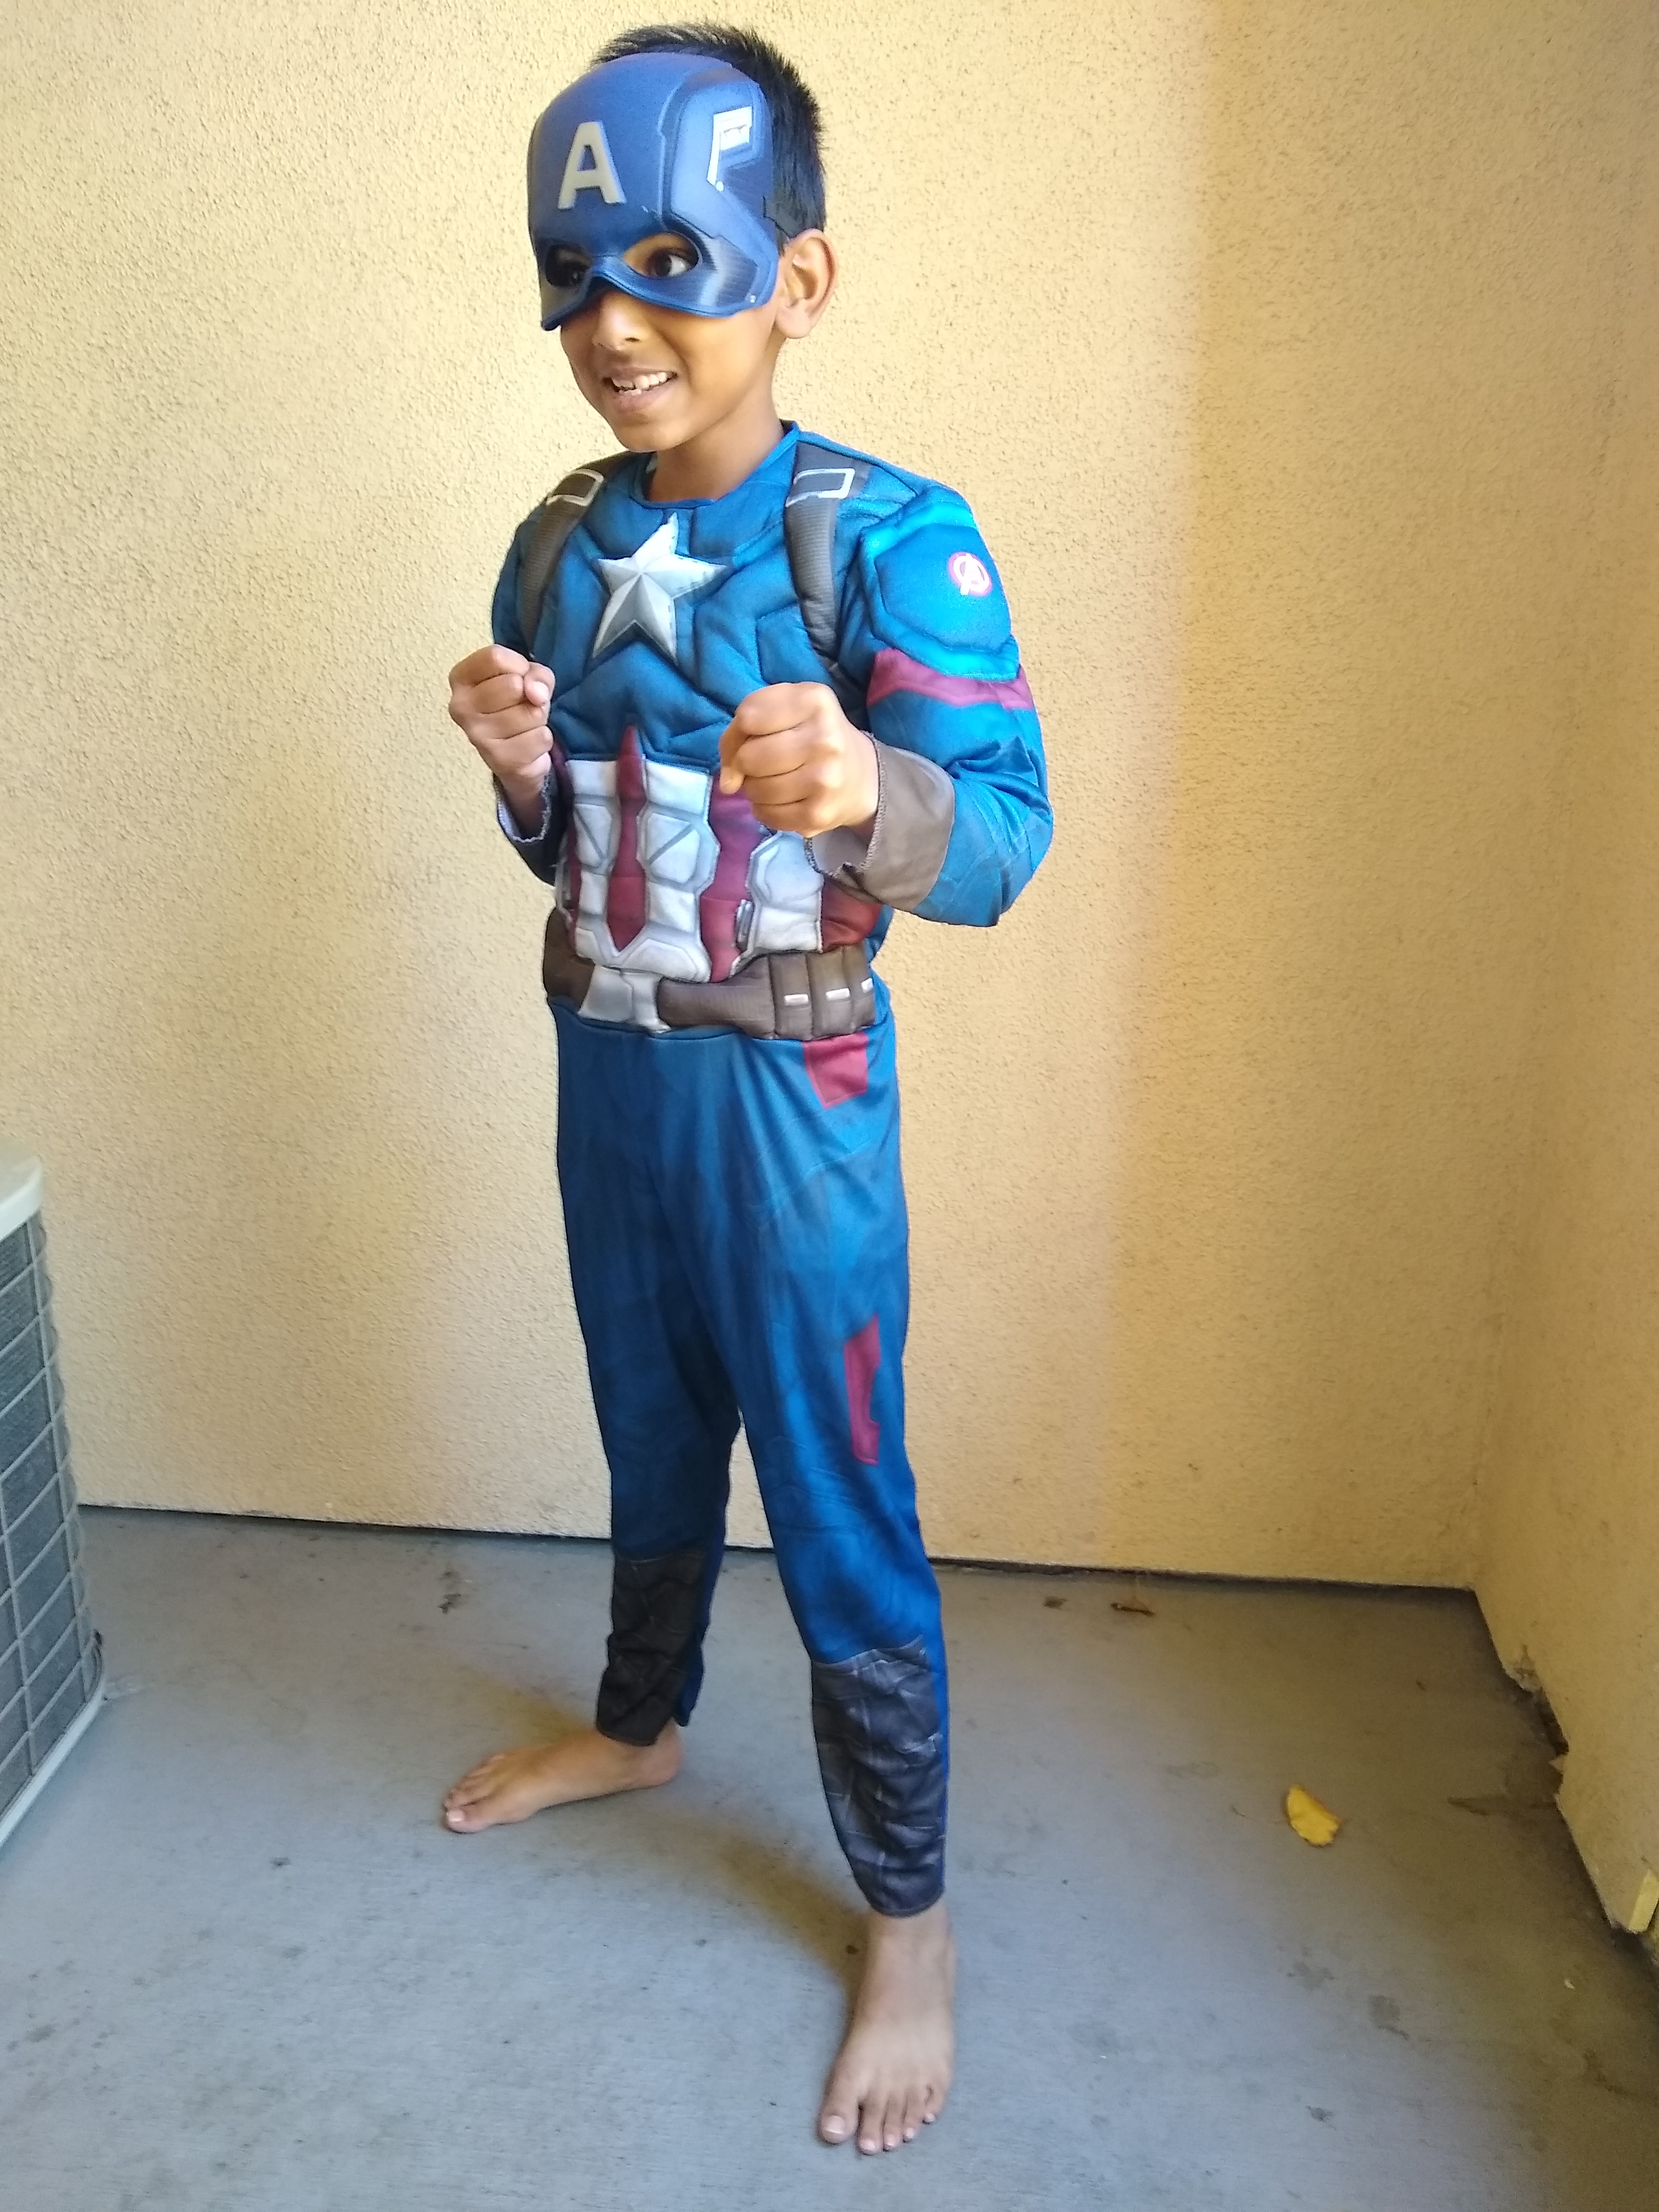 Me dressed up as Captian America